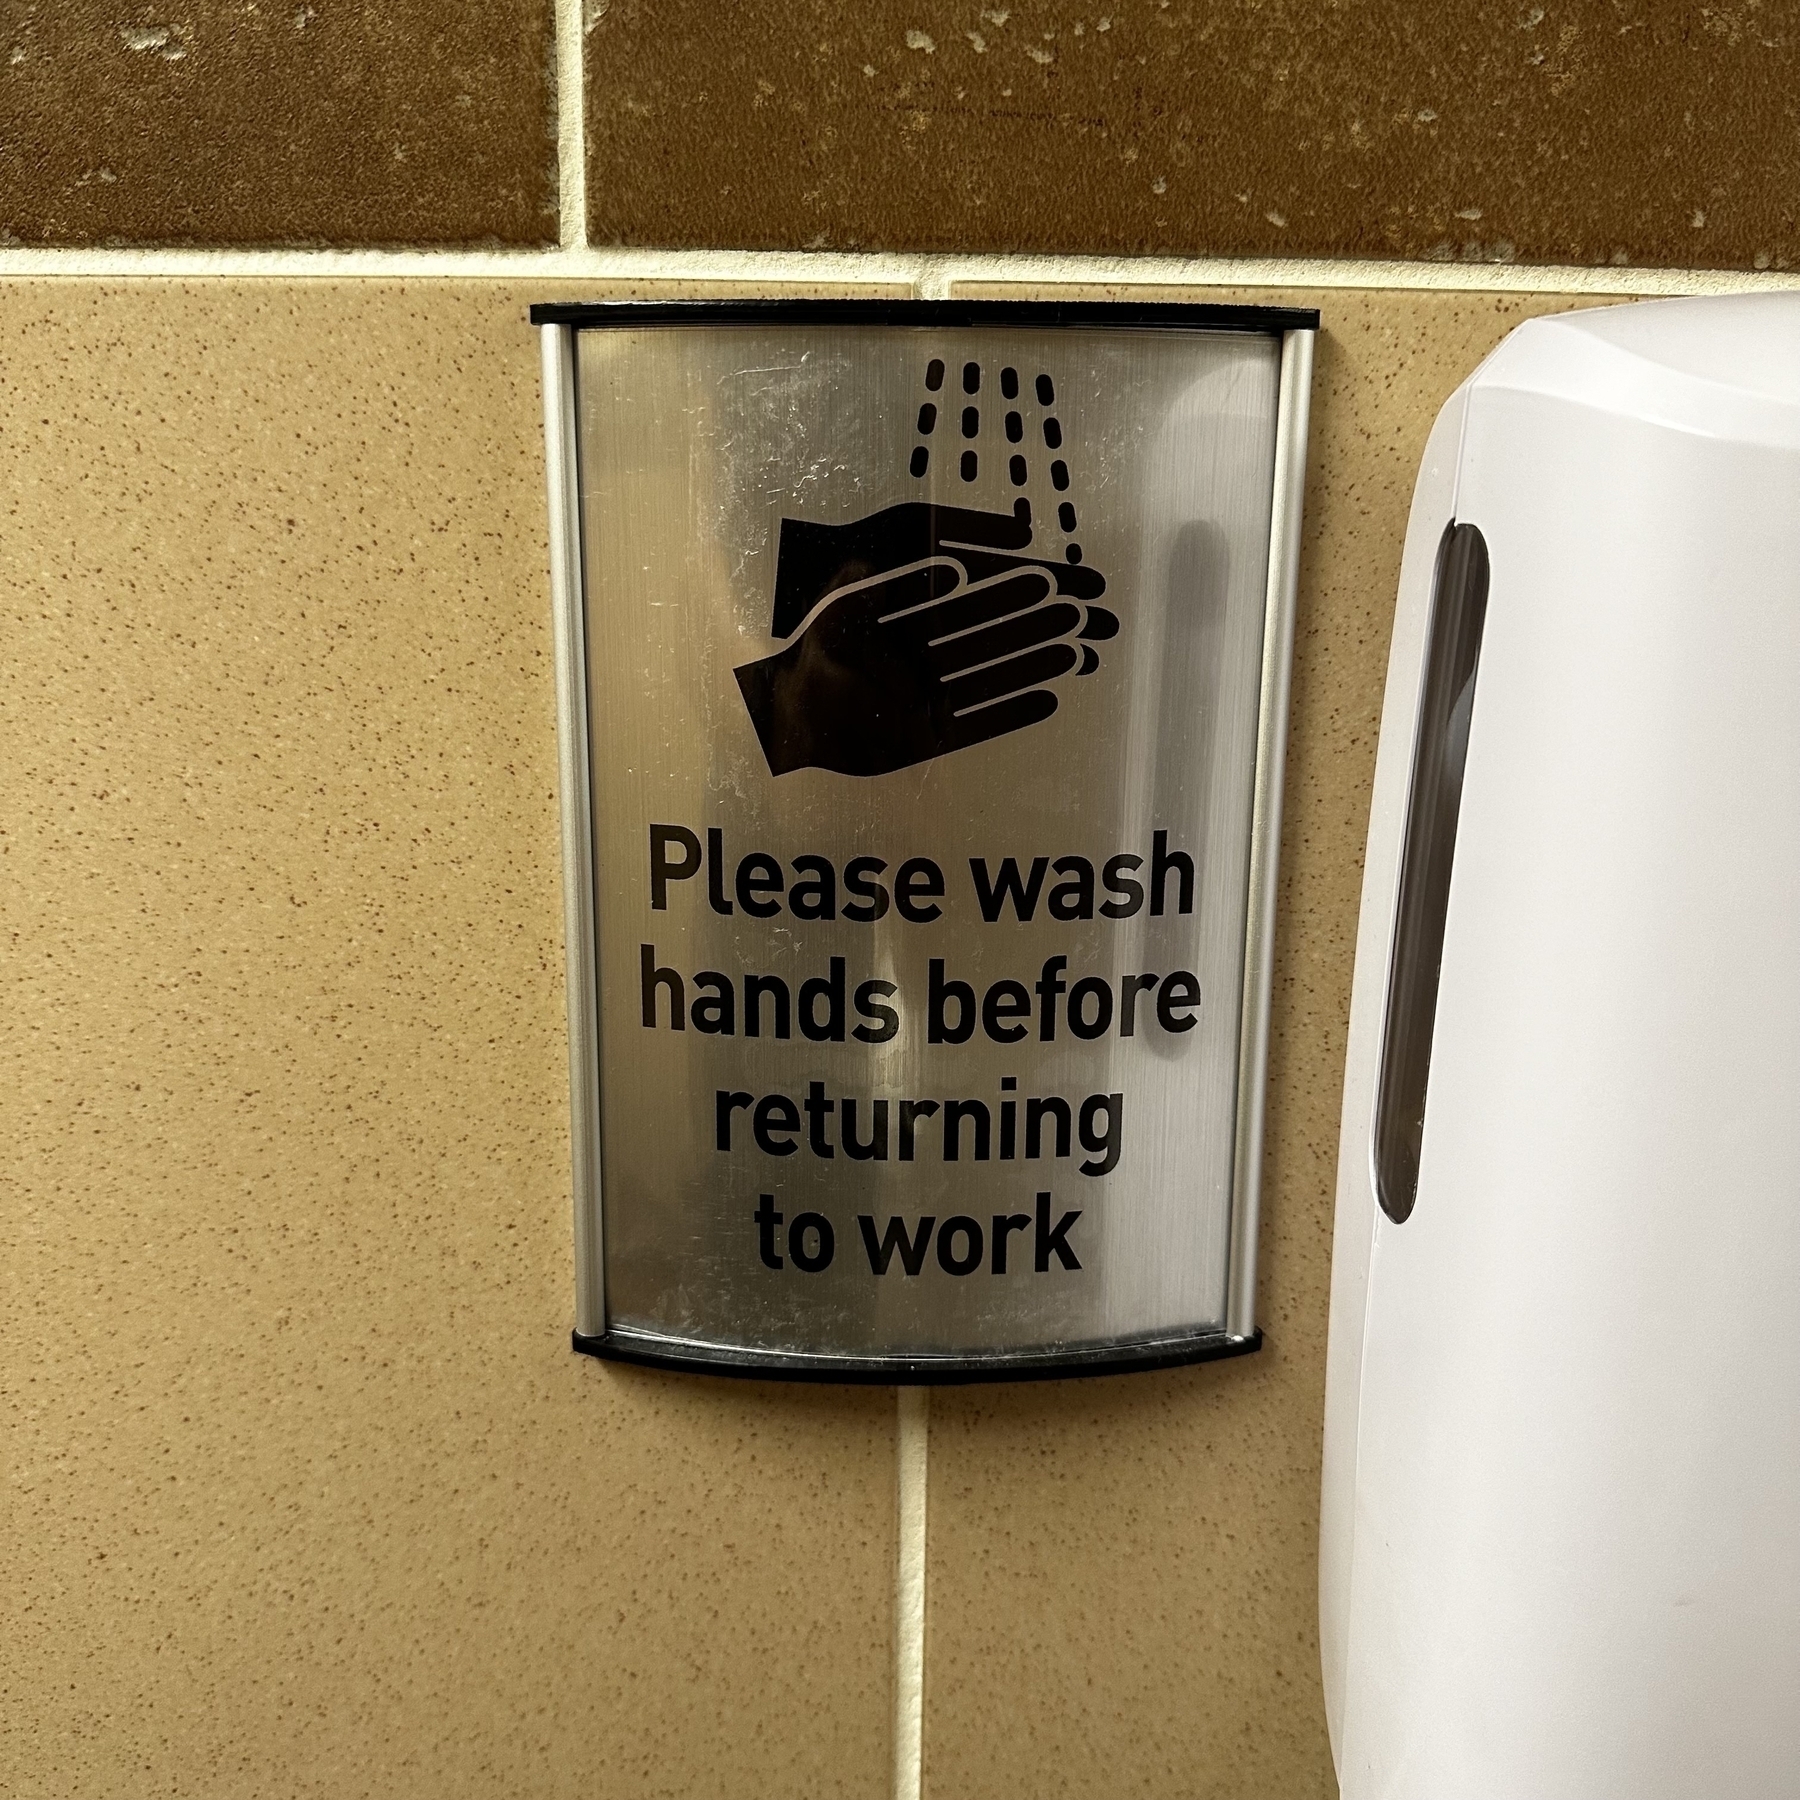 Please wash hands before returning to work sign.